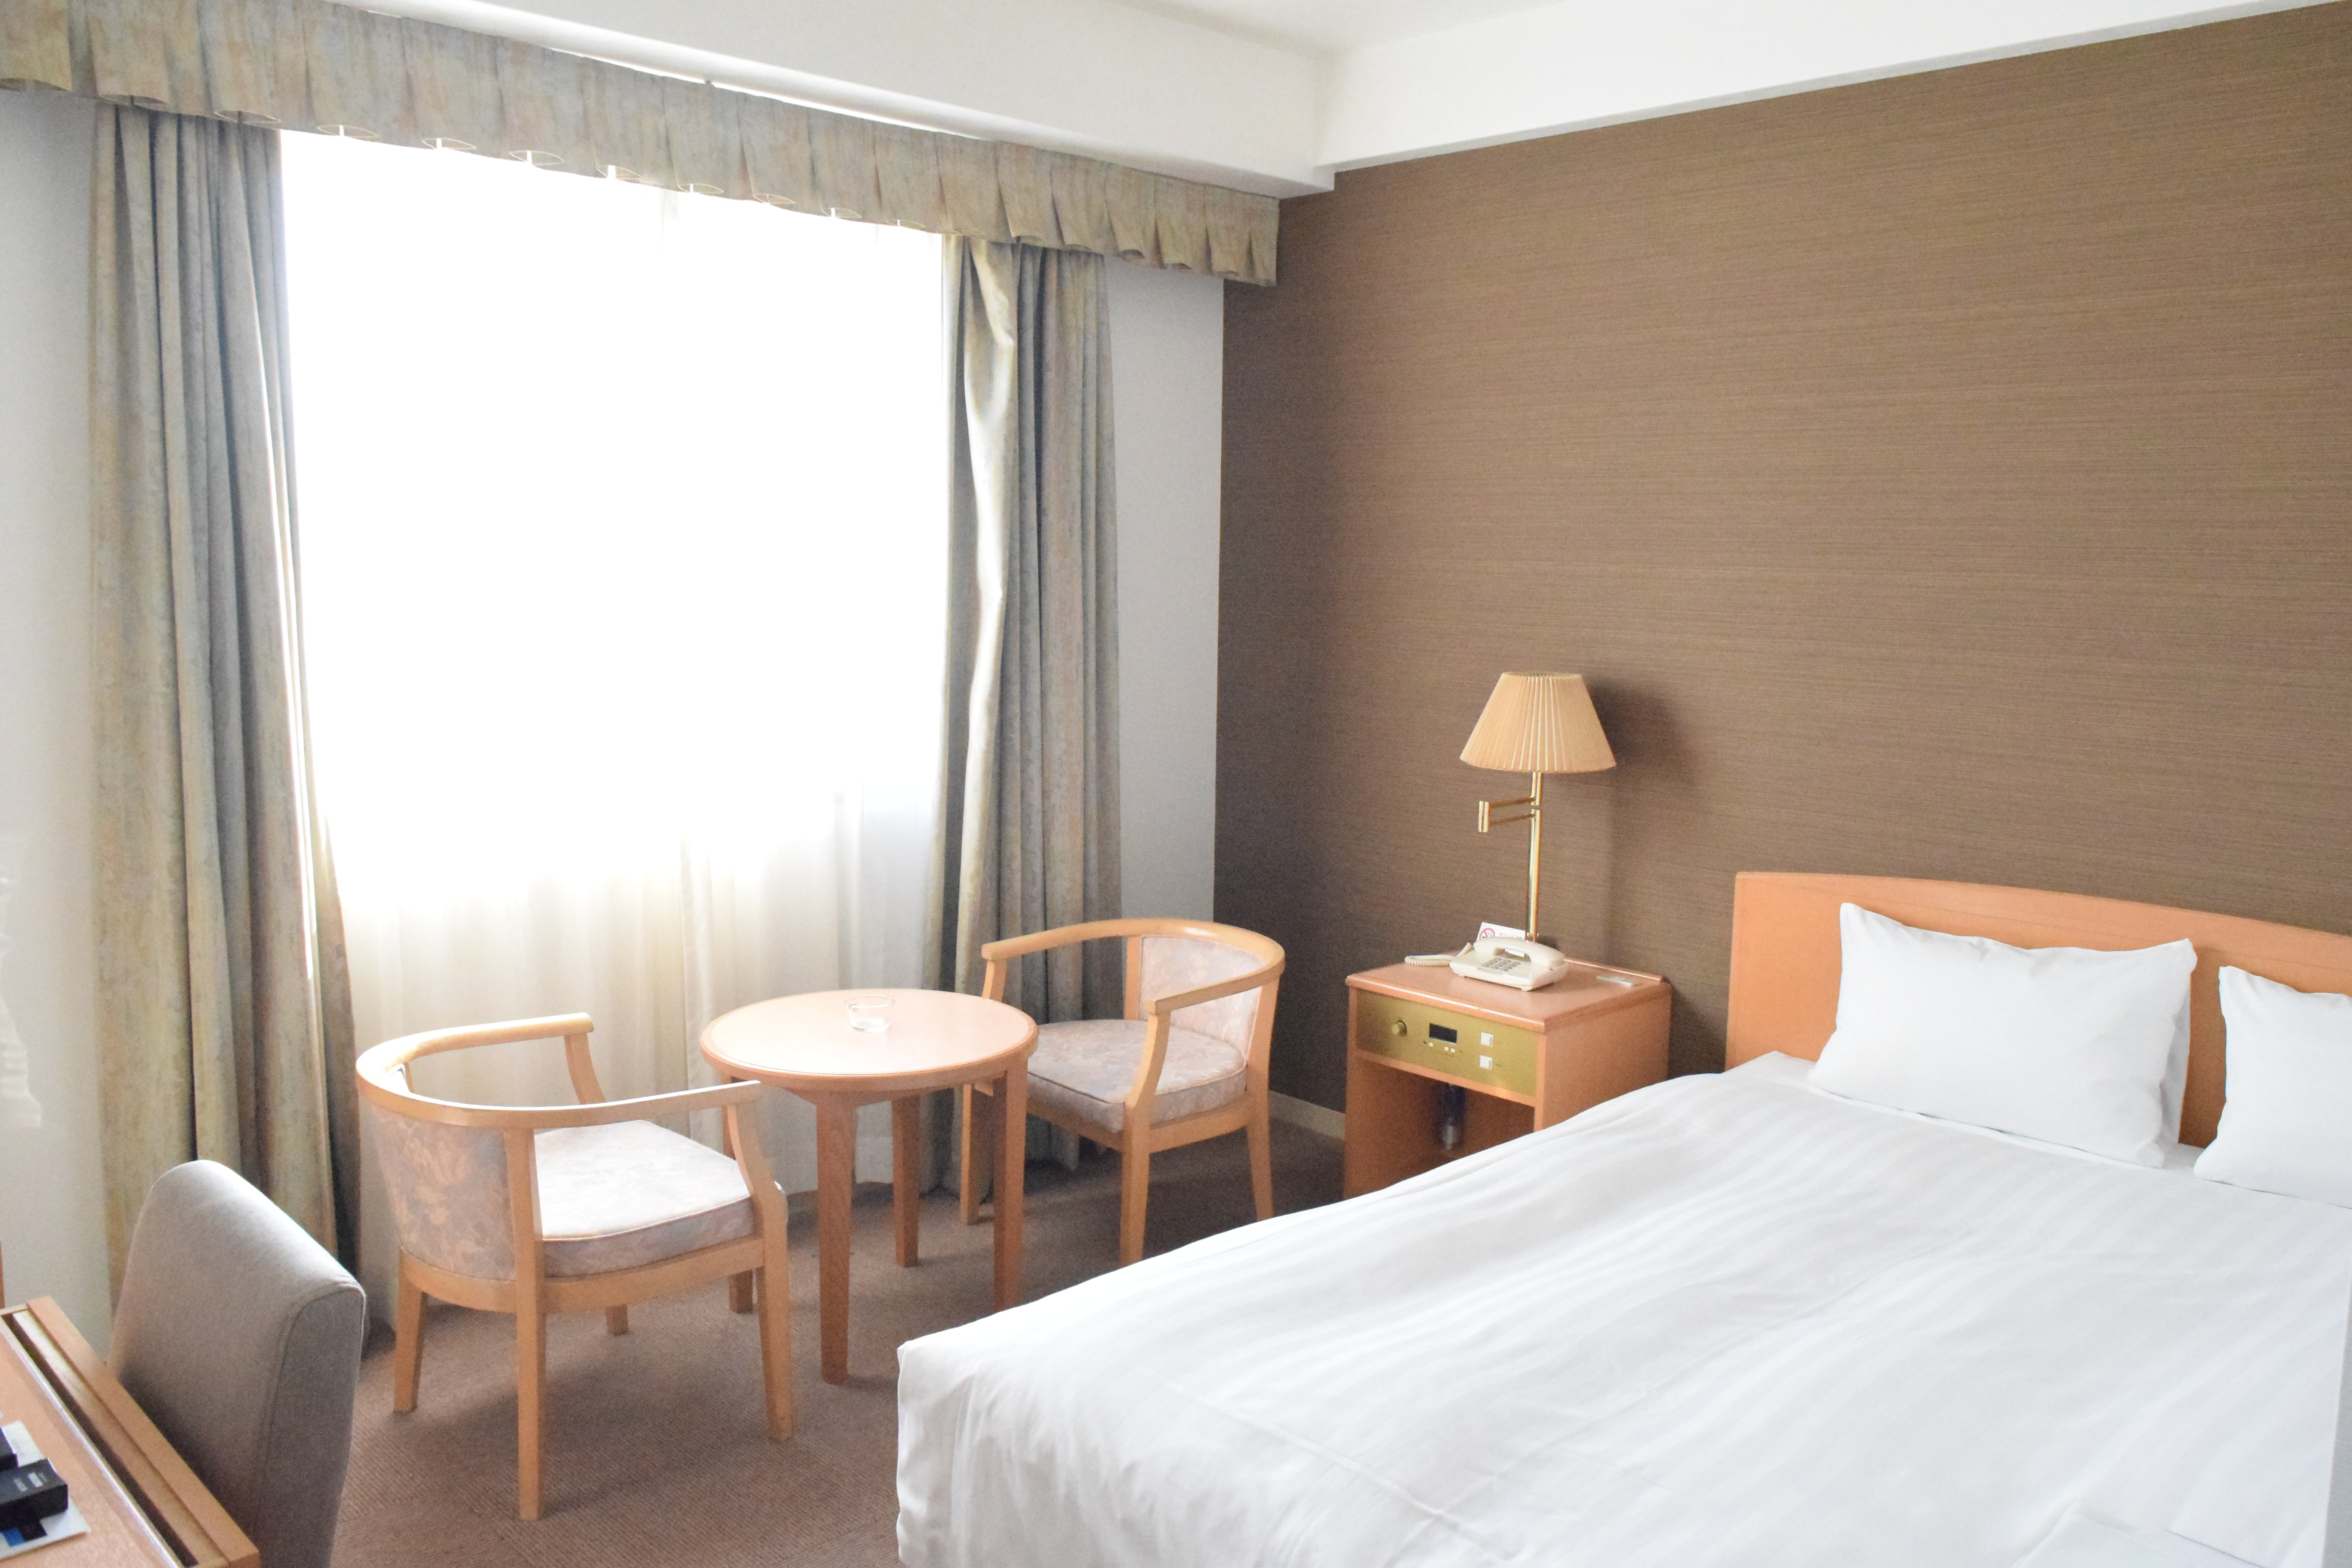 [Double Room B] We have a 140 cm double bed in a spacious room where you can spend a relaxing time ♪